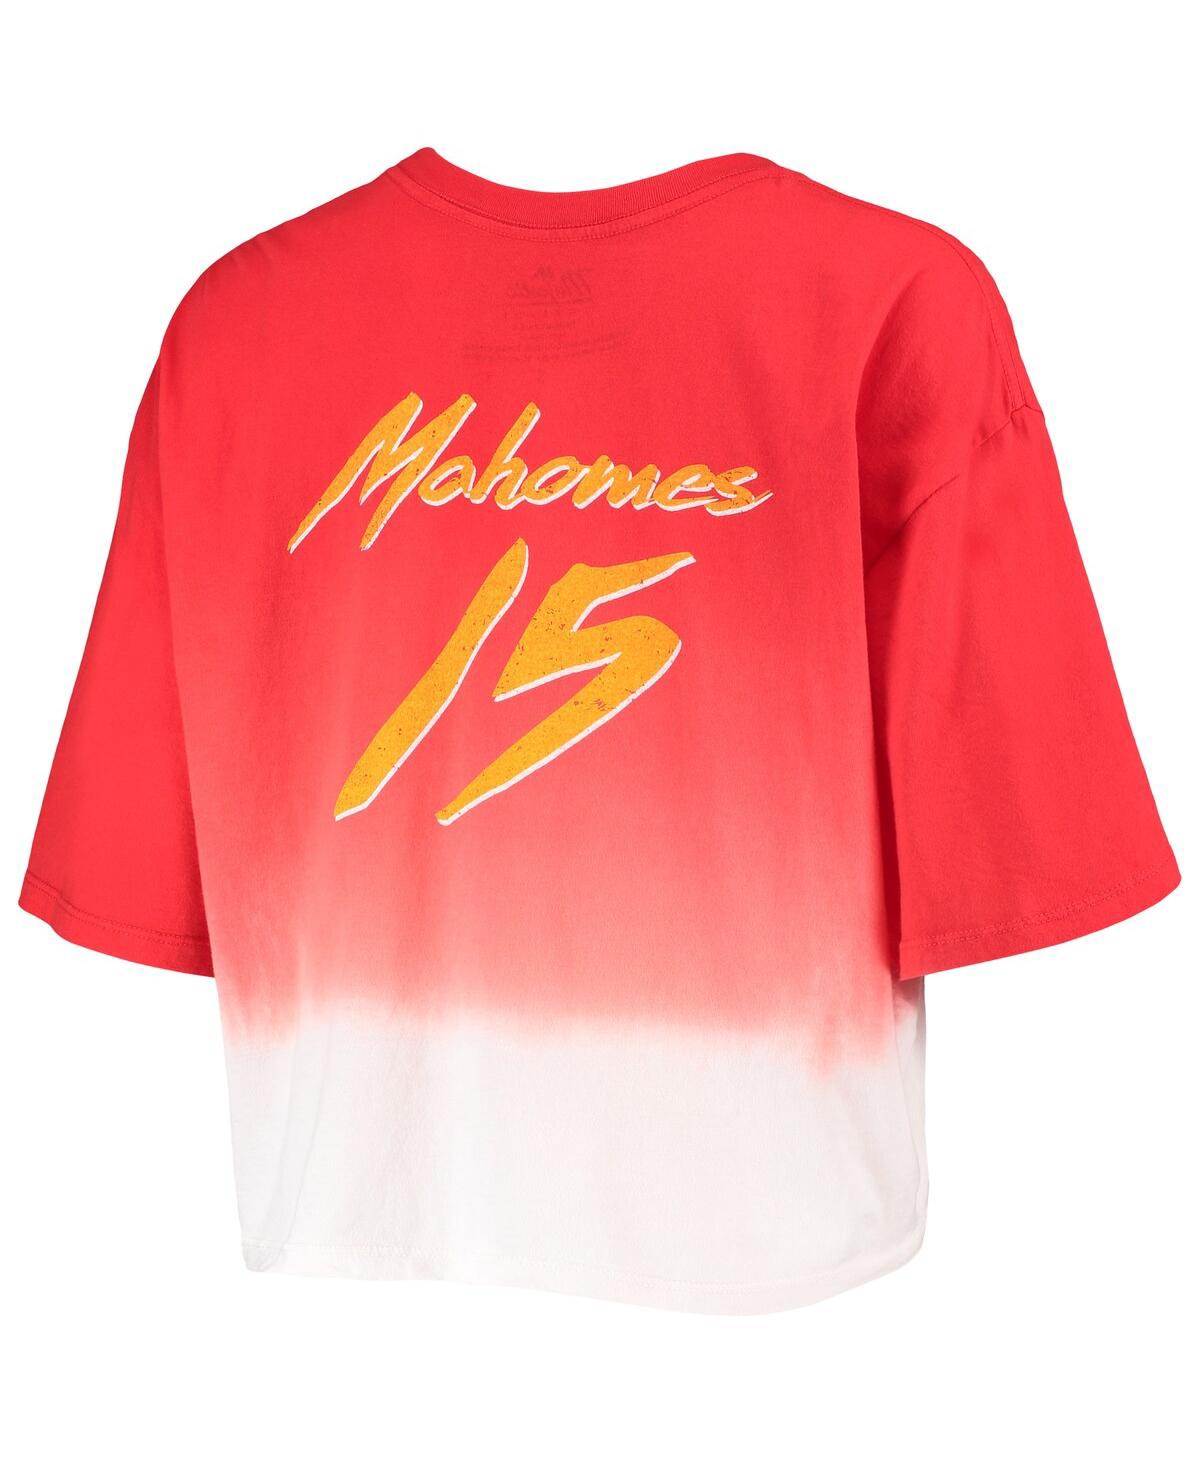 Shop Majestic Women's  Threads Patrick Mahomes Red, White Kansas City Chiefs Drip-dye Player Name And Numb In Red,white